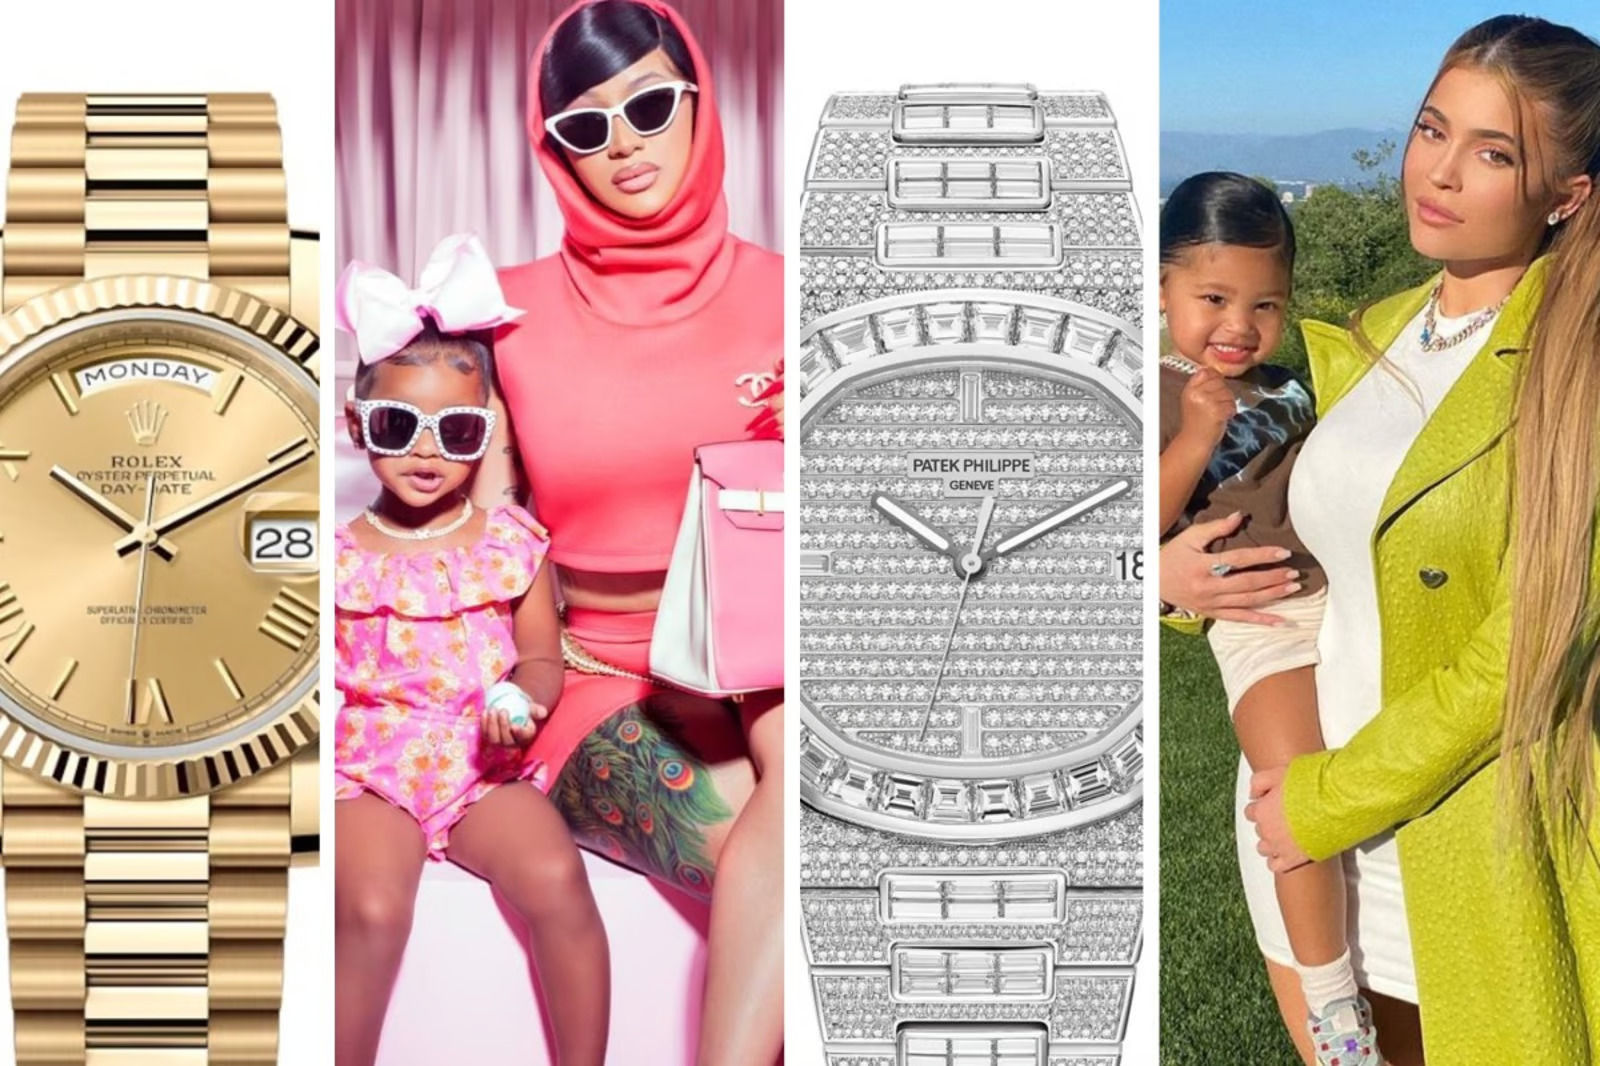 No Disney watches for us please - From Cristiano Ronaldo's son to Kylie  Jenner's daughter, you won't believe the ridiculously expensive watches  these celebrity kids wear. Nicki Minaj's 3 month old son